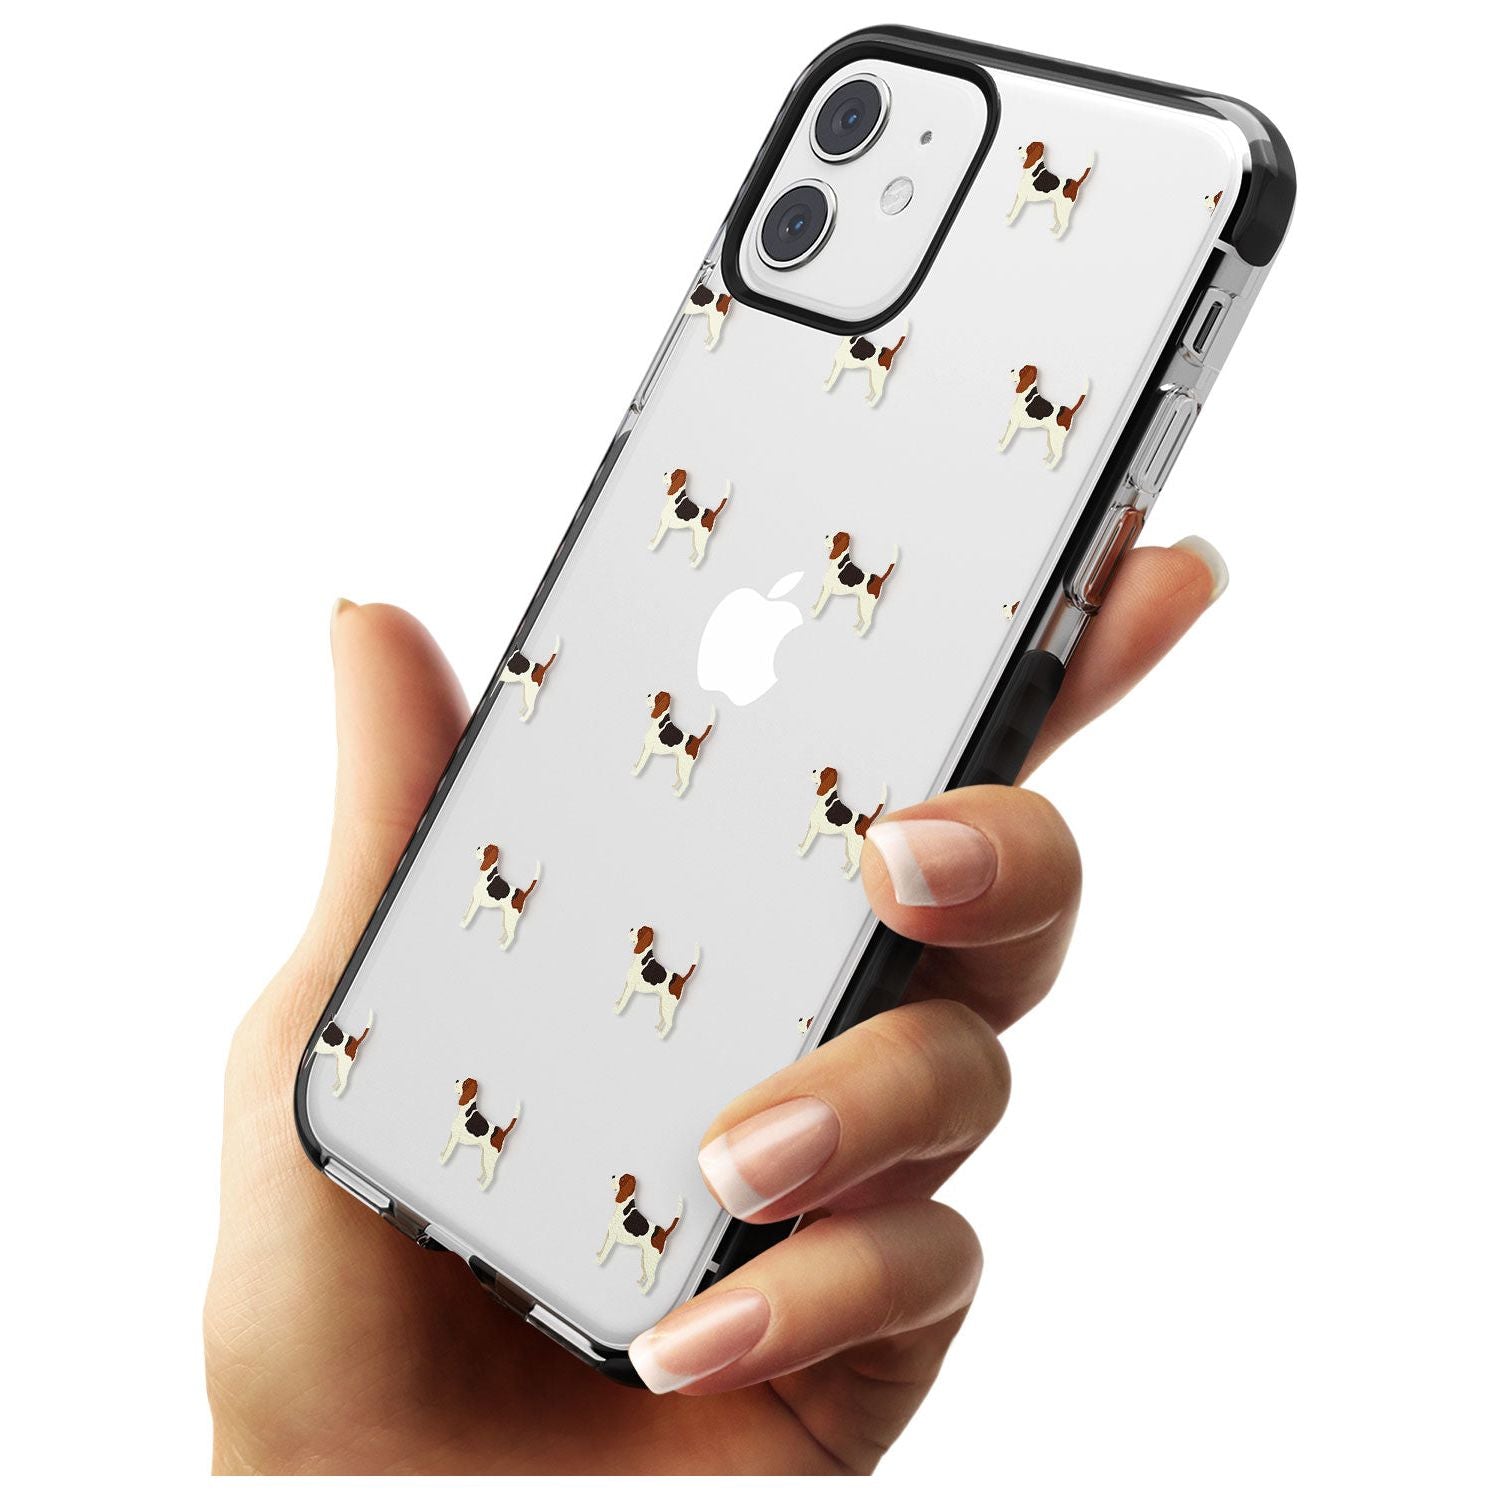 Beagle Dog Pattern Clear Black Impact Phone Case for iPhone 11